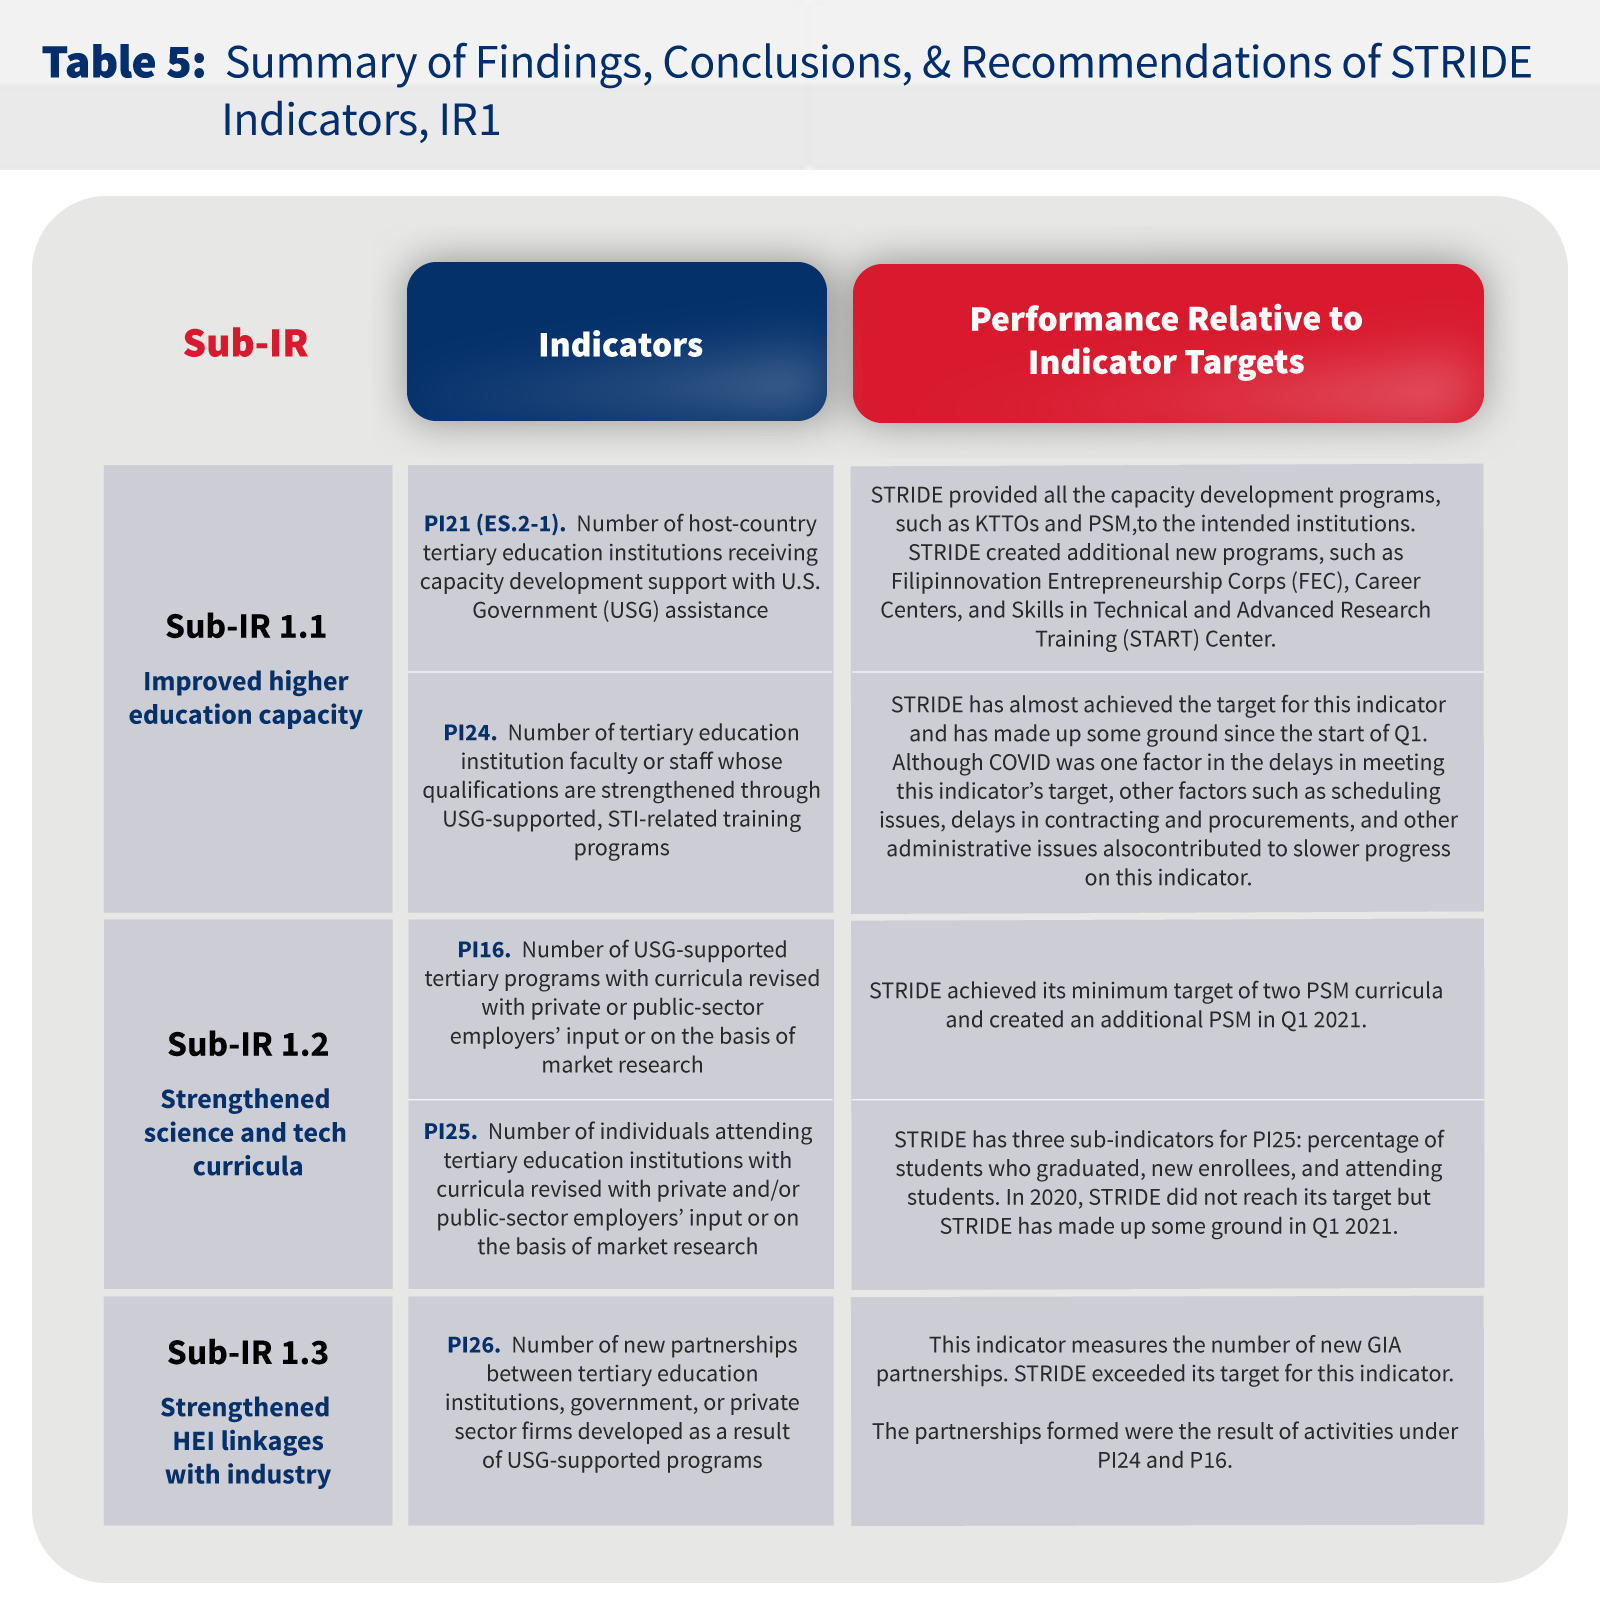 Table 5:  Summary of Findings, Conclusions, & Recommendations of STRIDE Indicators, IR1